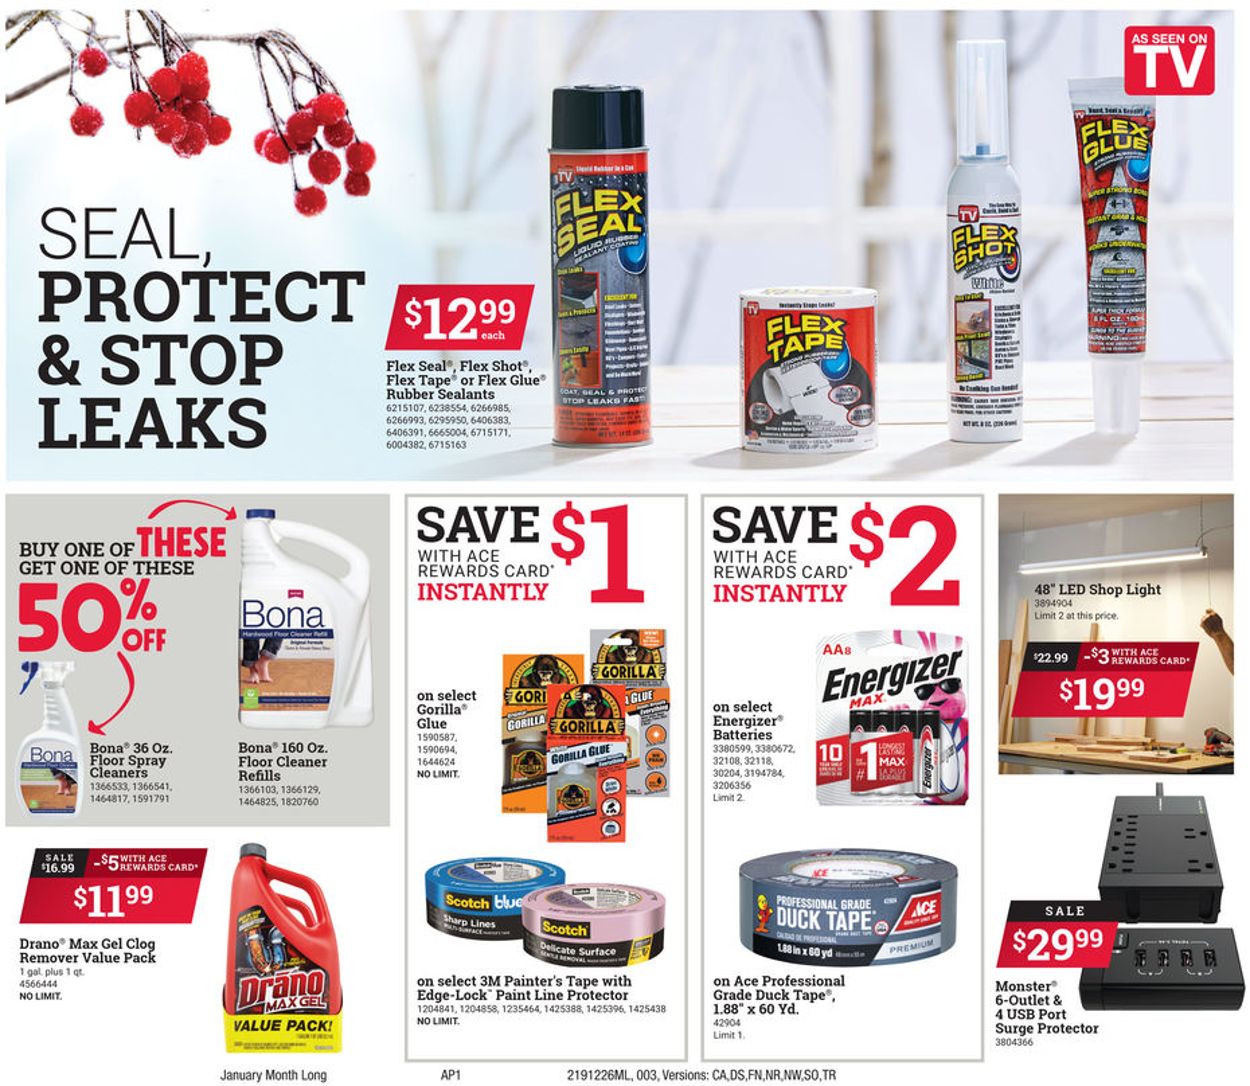 Ace Hardware Current weekly ad 12/26 01/31/2020 [3